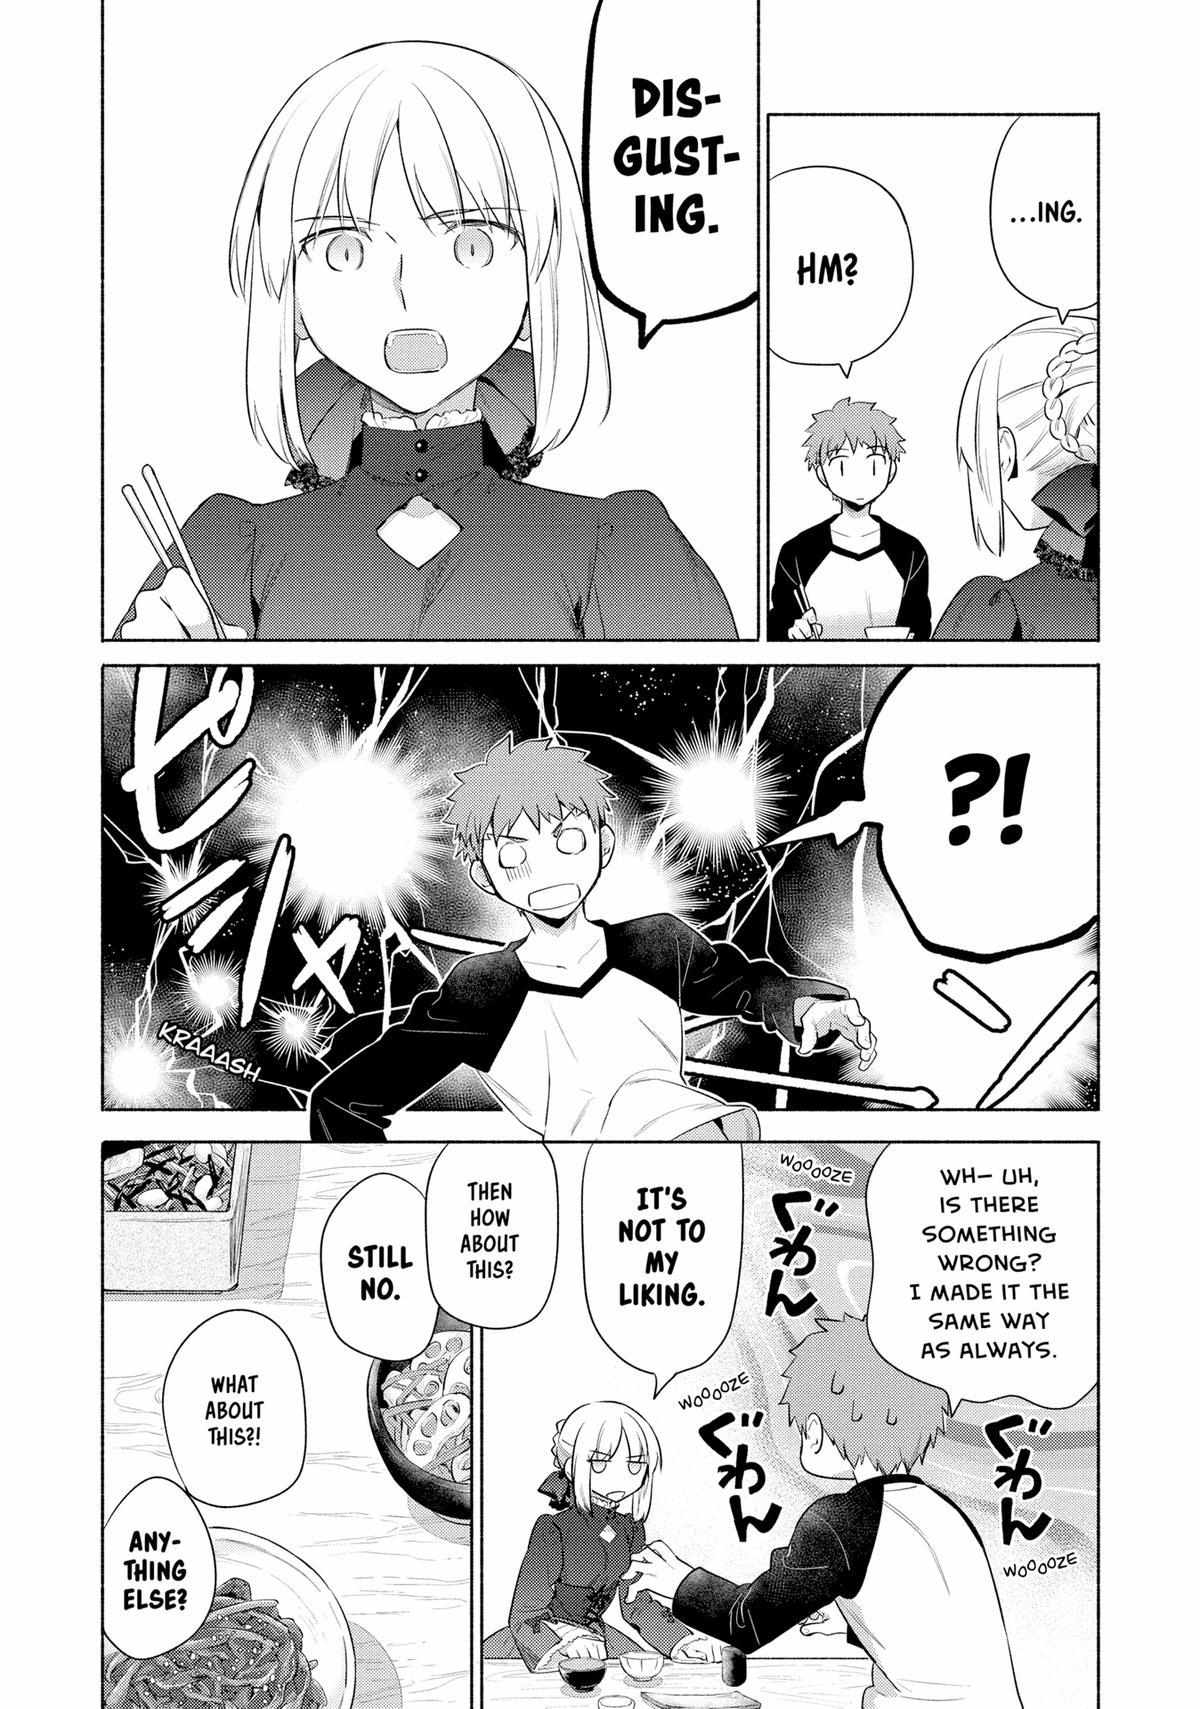 What's Cooking at the Emiya House Today? - chapter 30.5 - #6